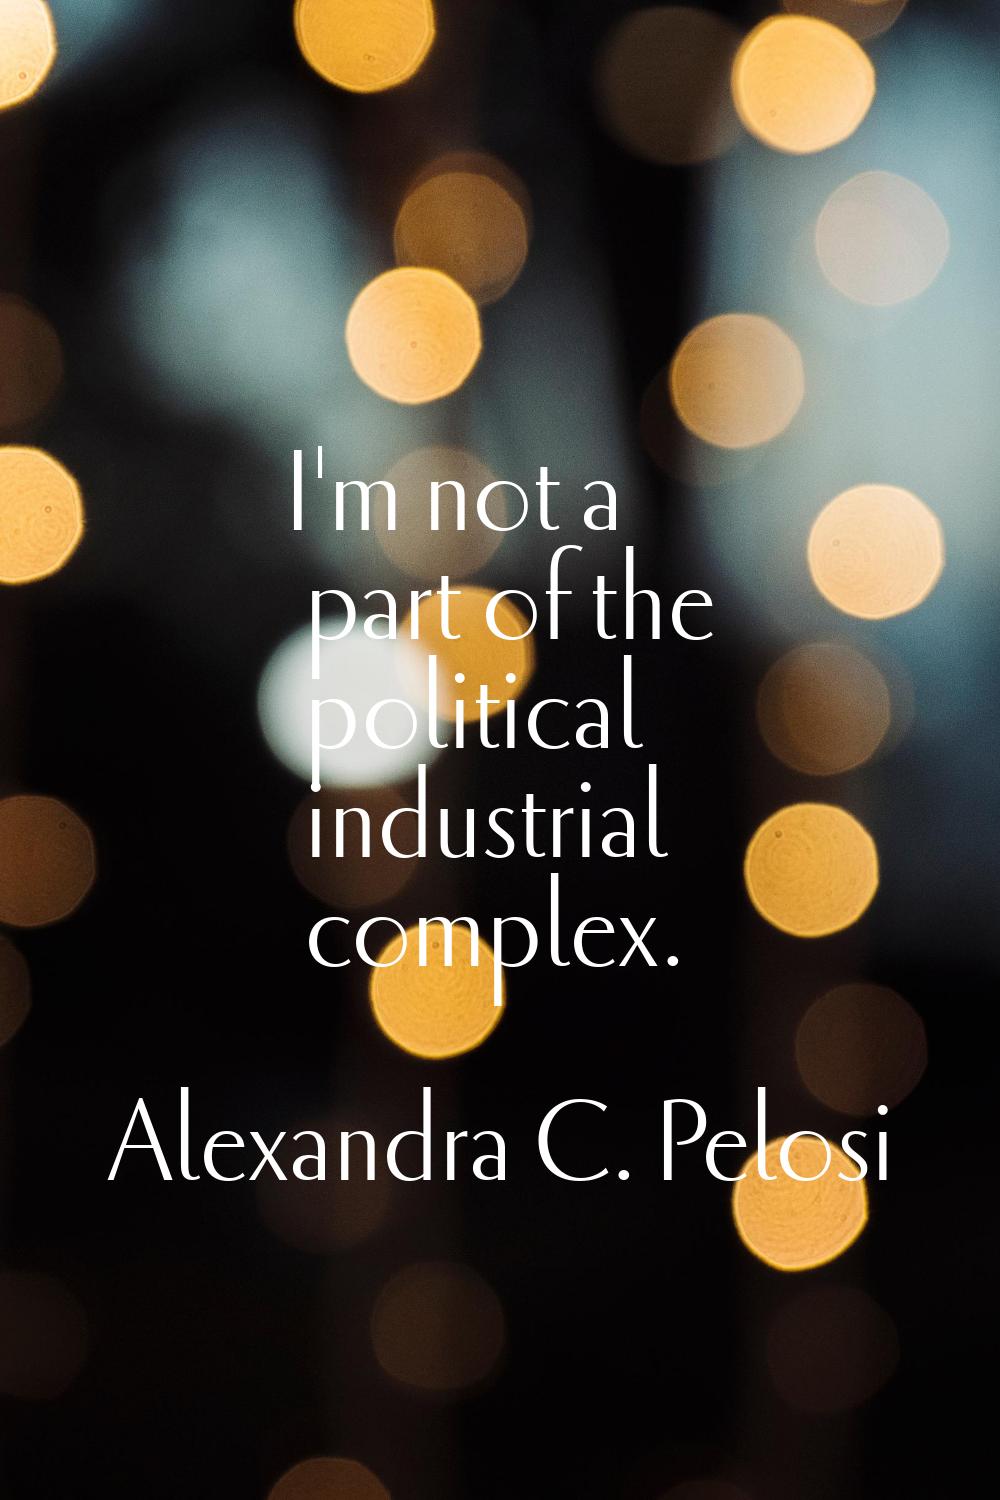 I'm not a part of the political industrial complex.